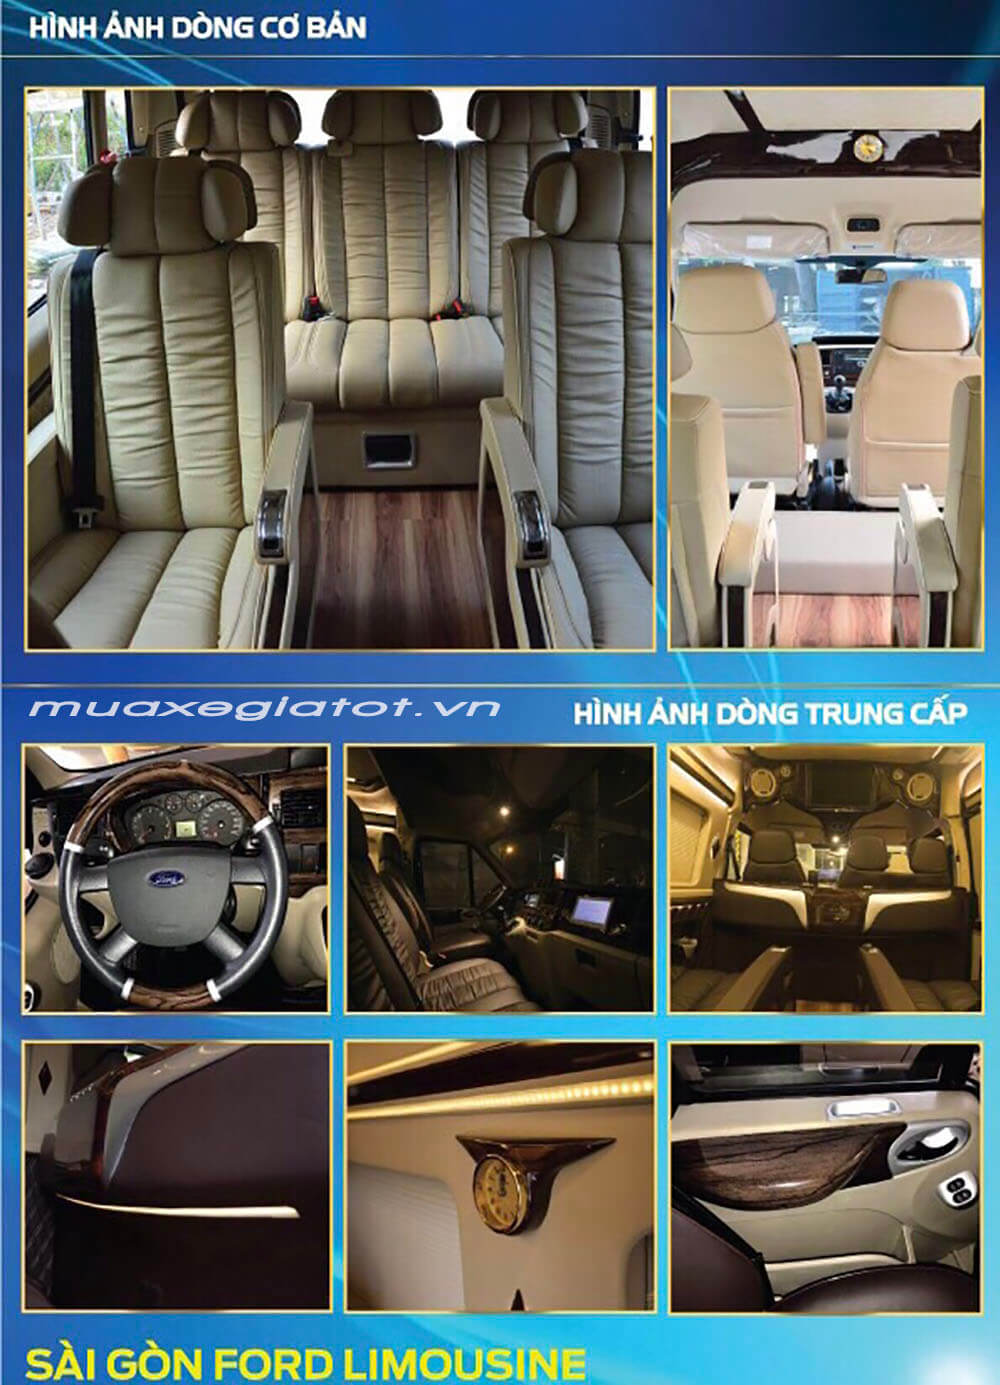 catalogue-xe-ford-transit-limousine-muaxegiatot-vn-3